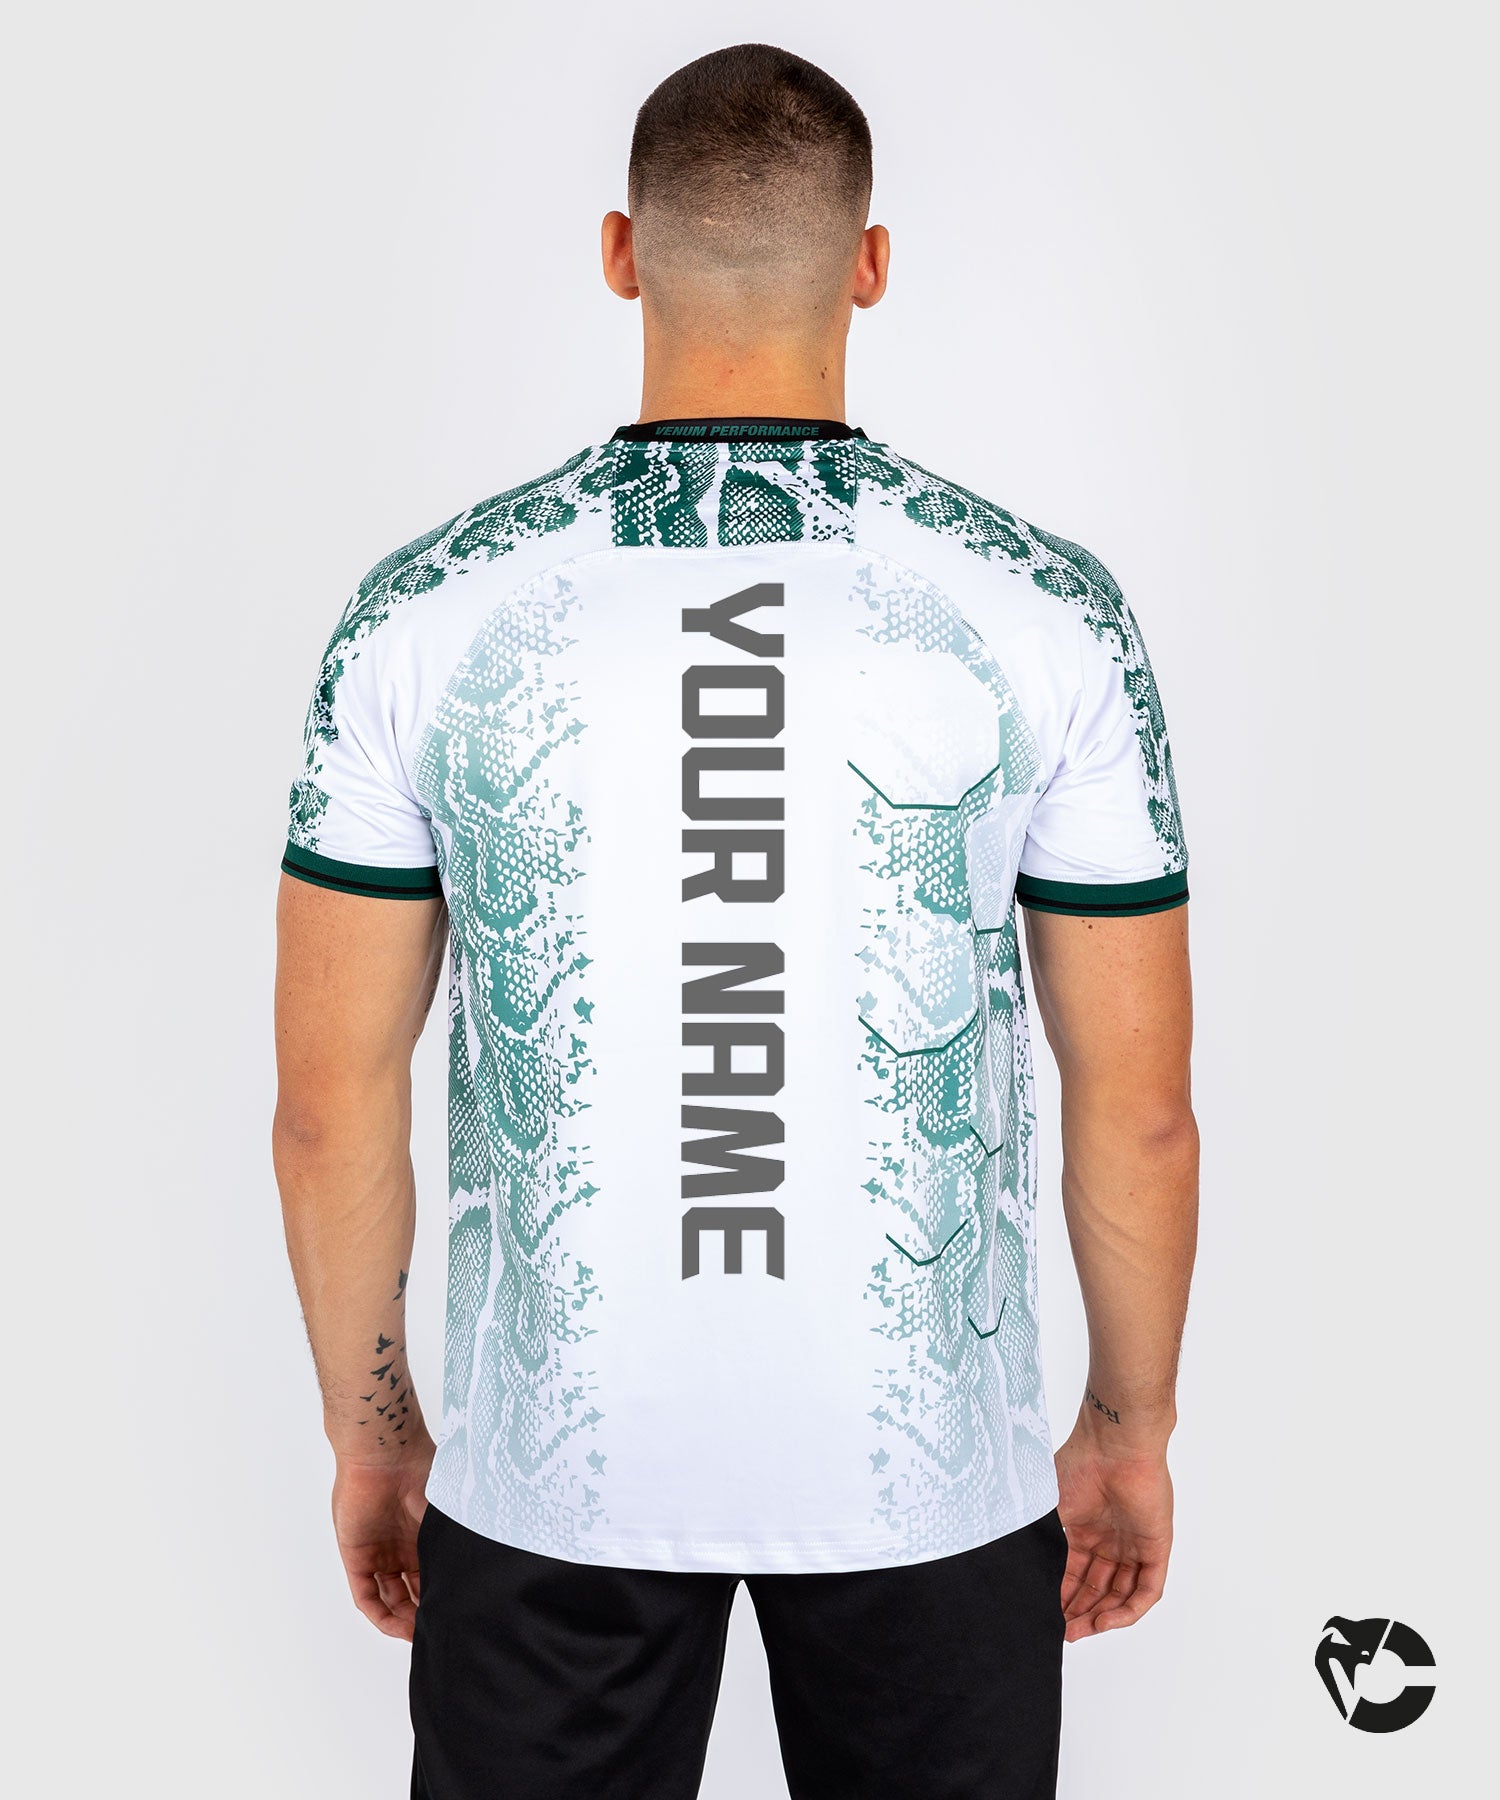 New UFC Fighter Jersey Drops Today  VENUM Authentic Adrenaline Collection  